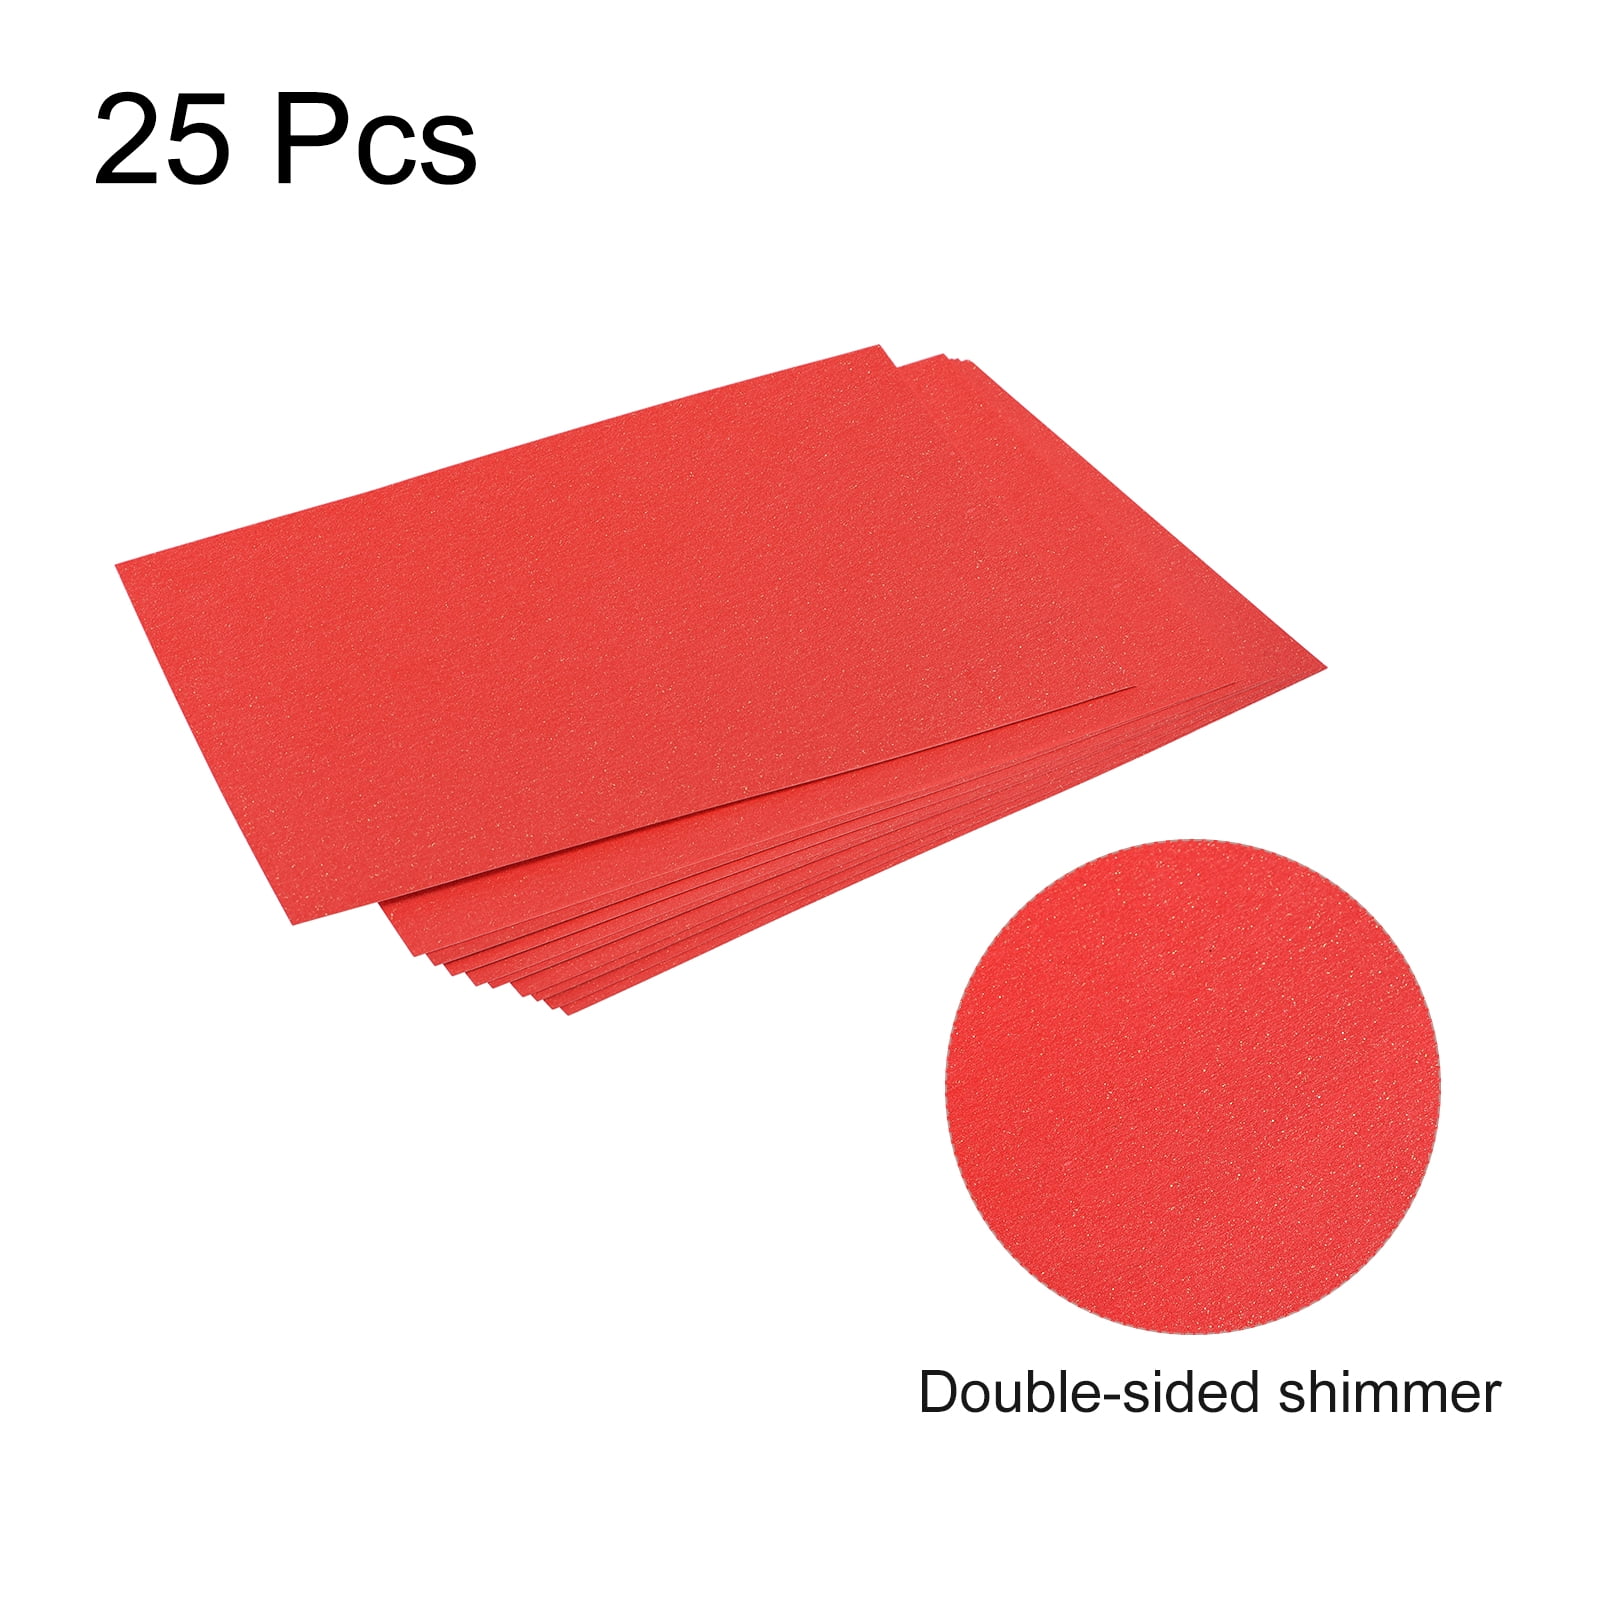 25 Sheets Christmas Red Cardstock - 8.5'' x 11'' 92lb Double-sided Cover  Card Stock 250gsm Heavyweight Paper for Art Crafts Business Cards Party  Décor